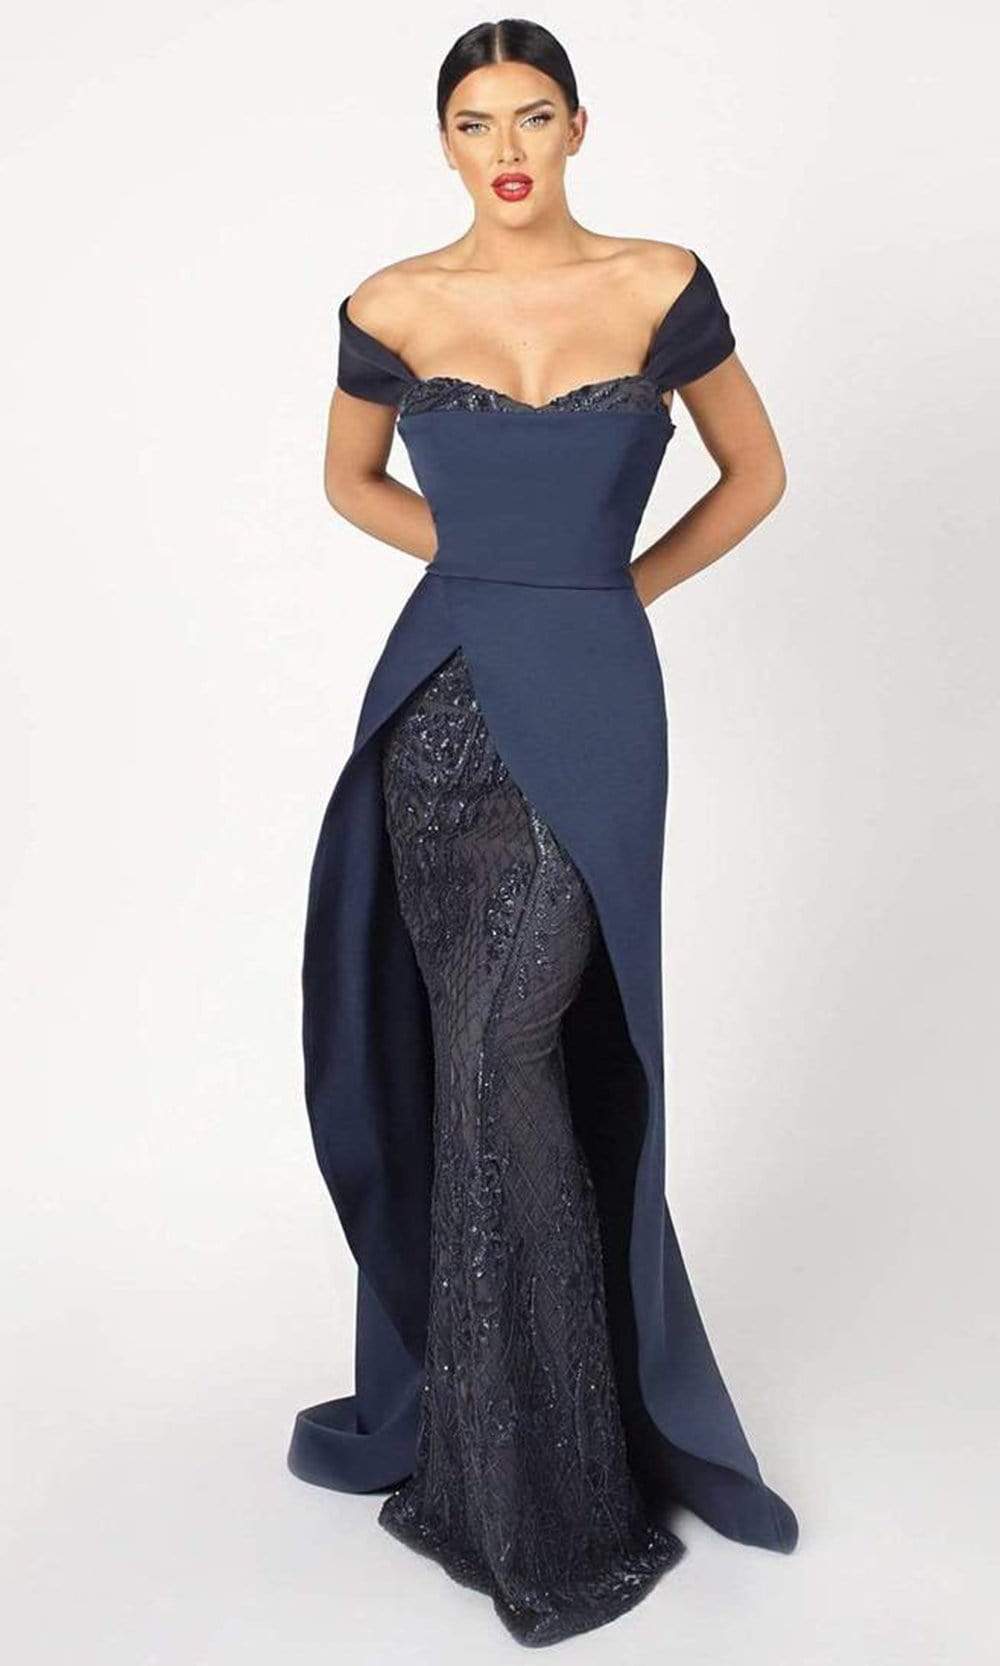 Nicole Bakti - 7029SC Sweetheart Creative Overlay Evening Gown In Blue and Black